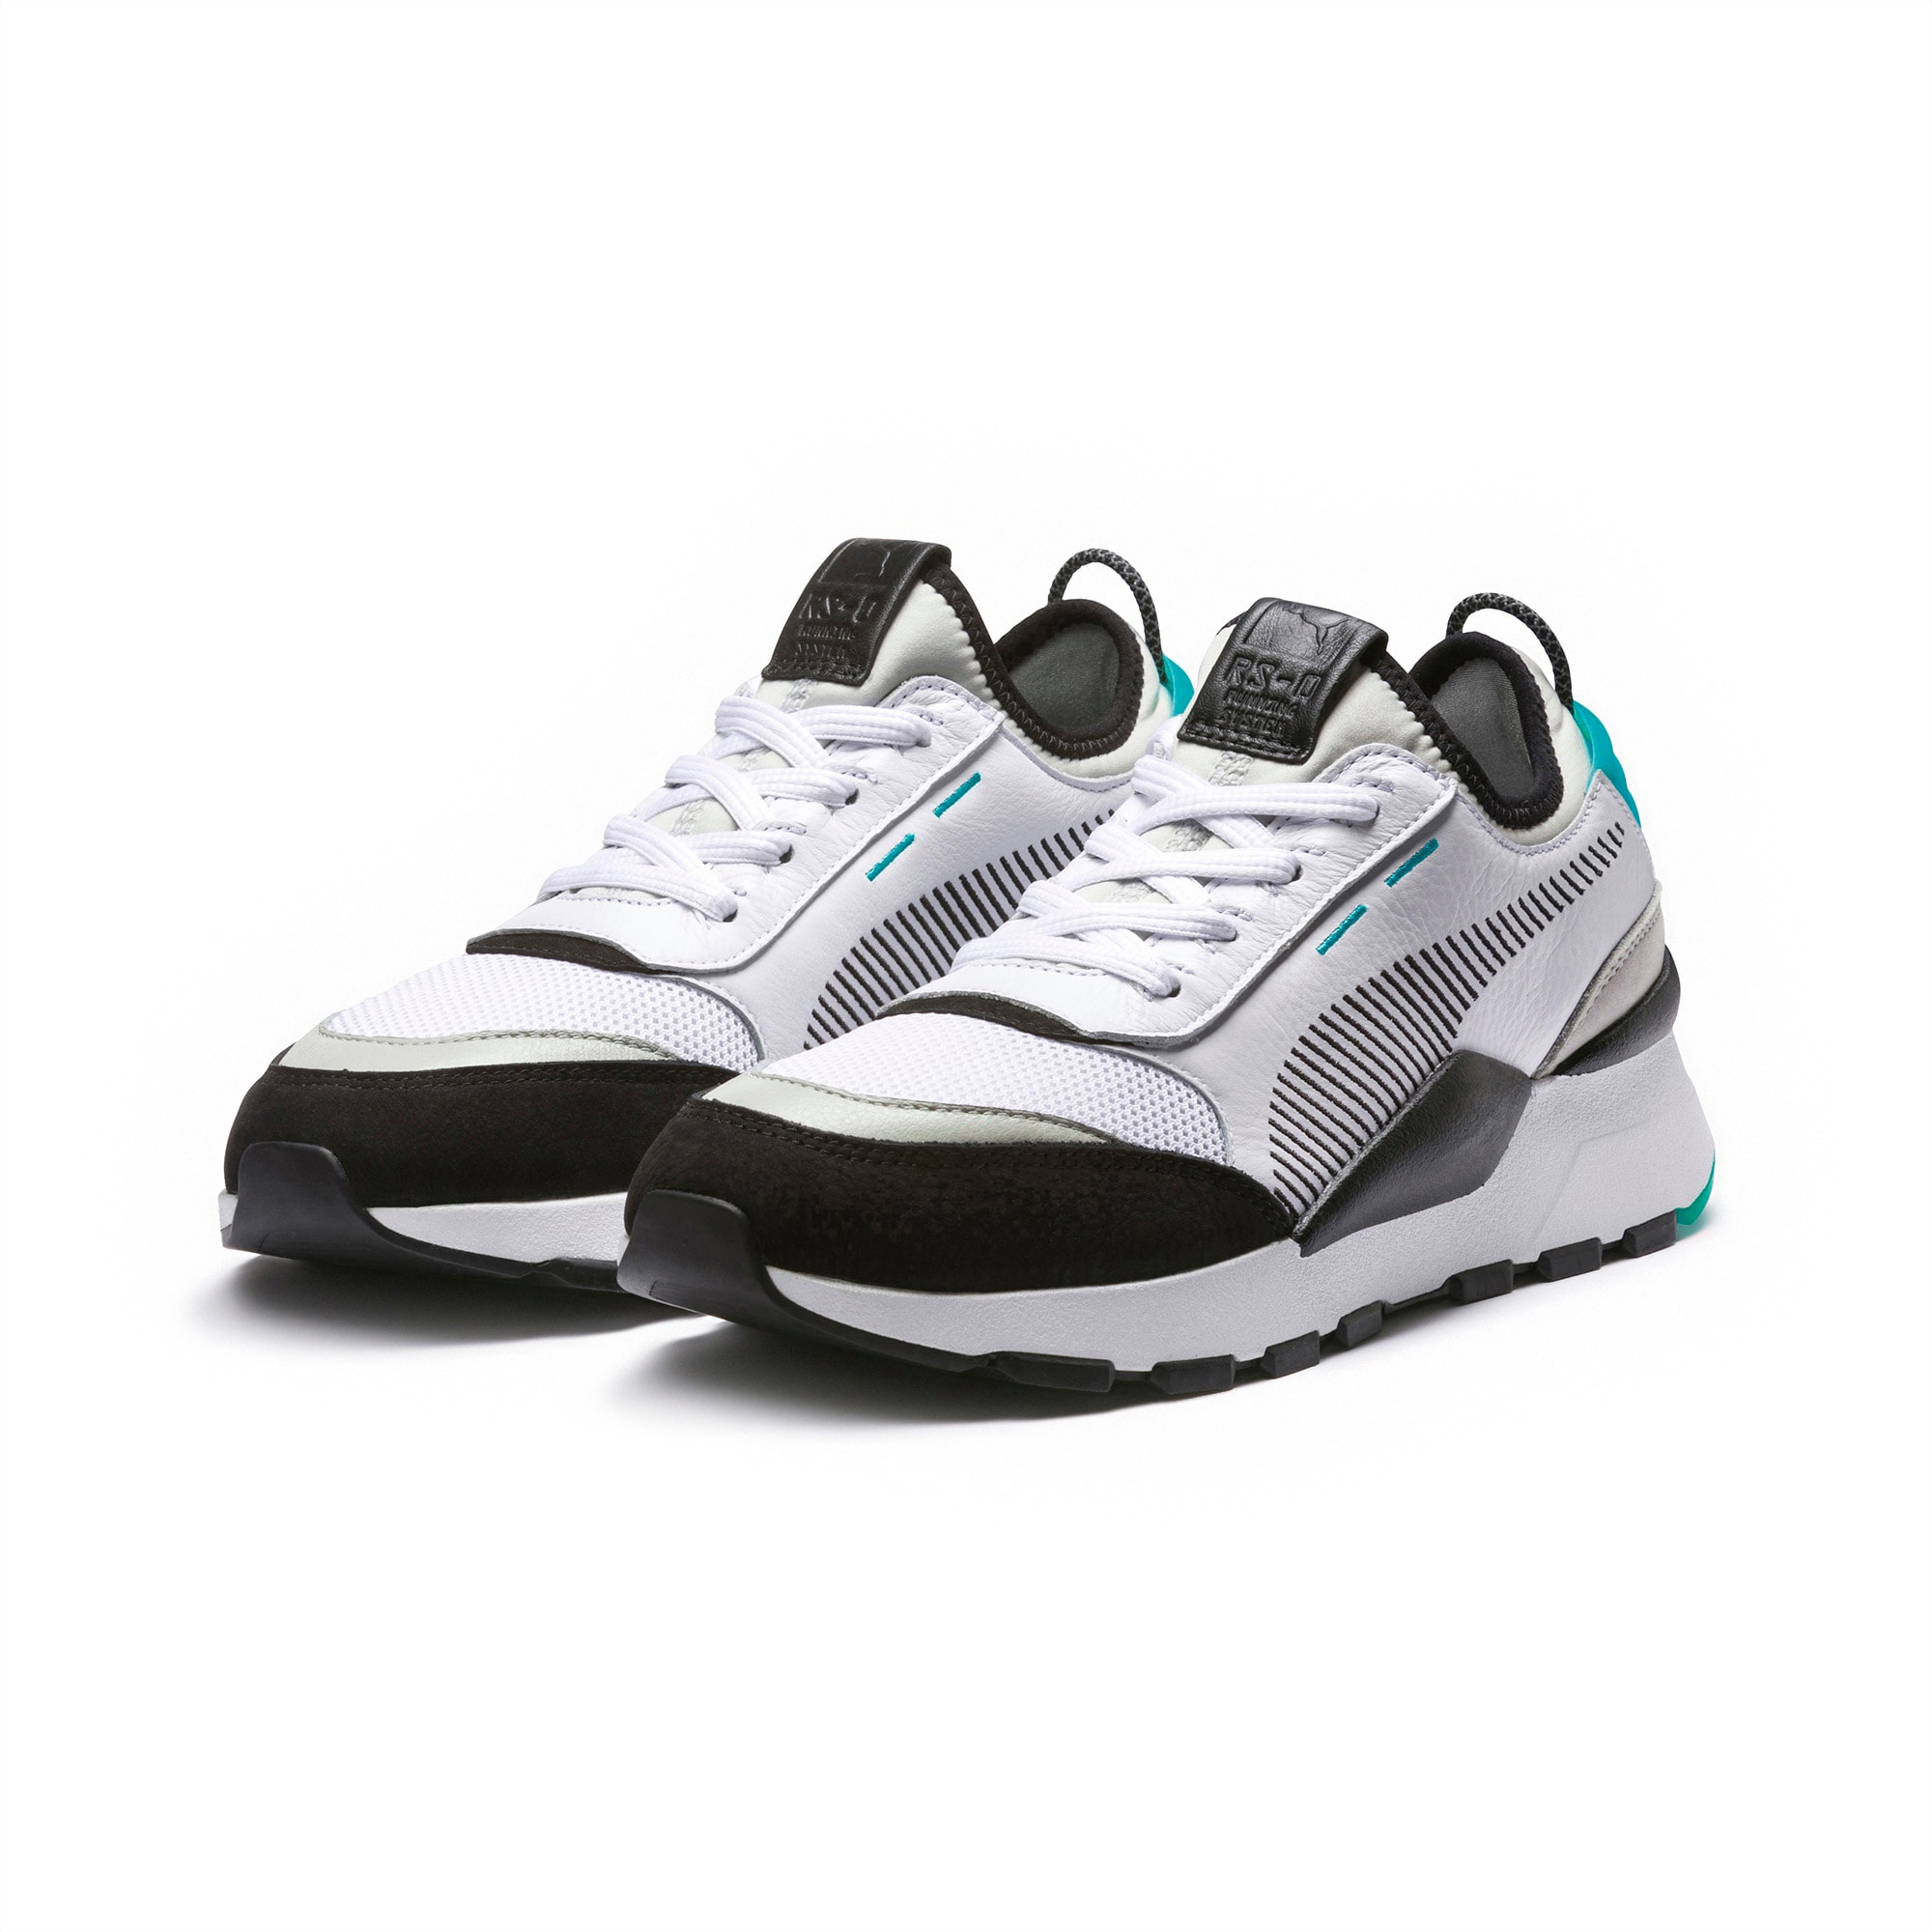 RS-0 Re-Invention Sneakers | PUMA US